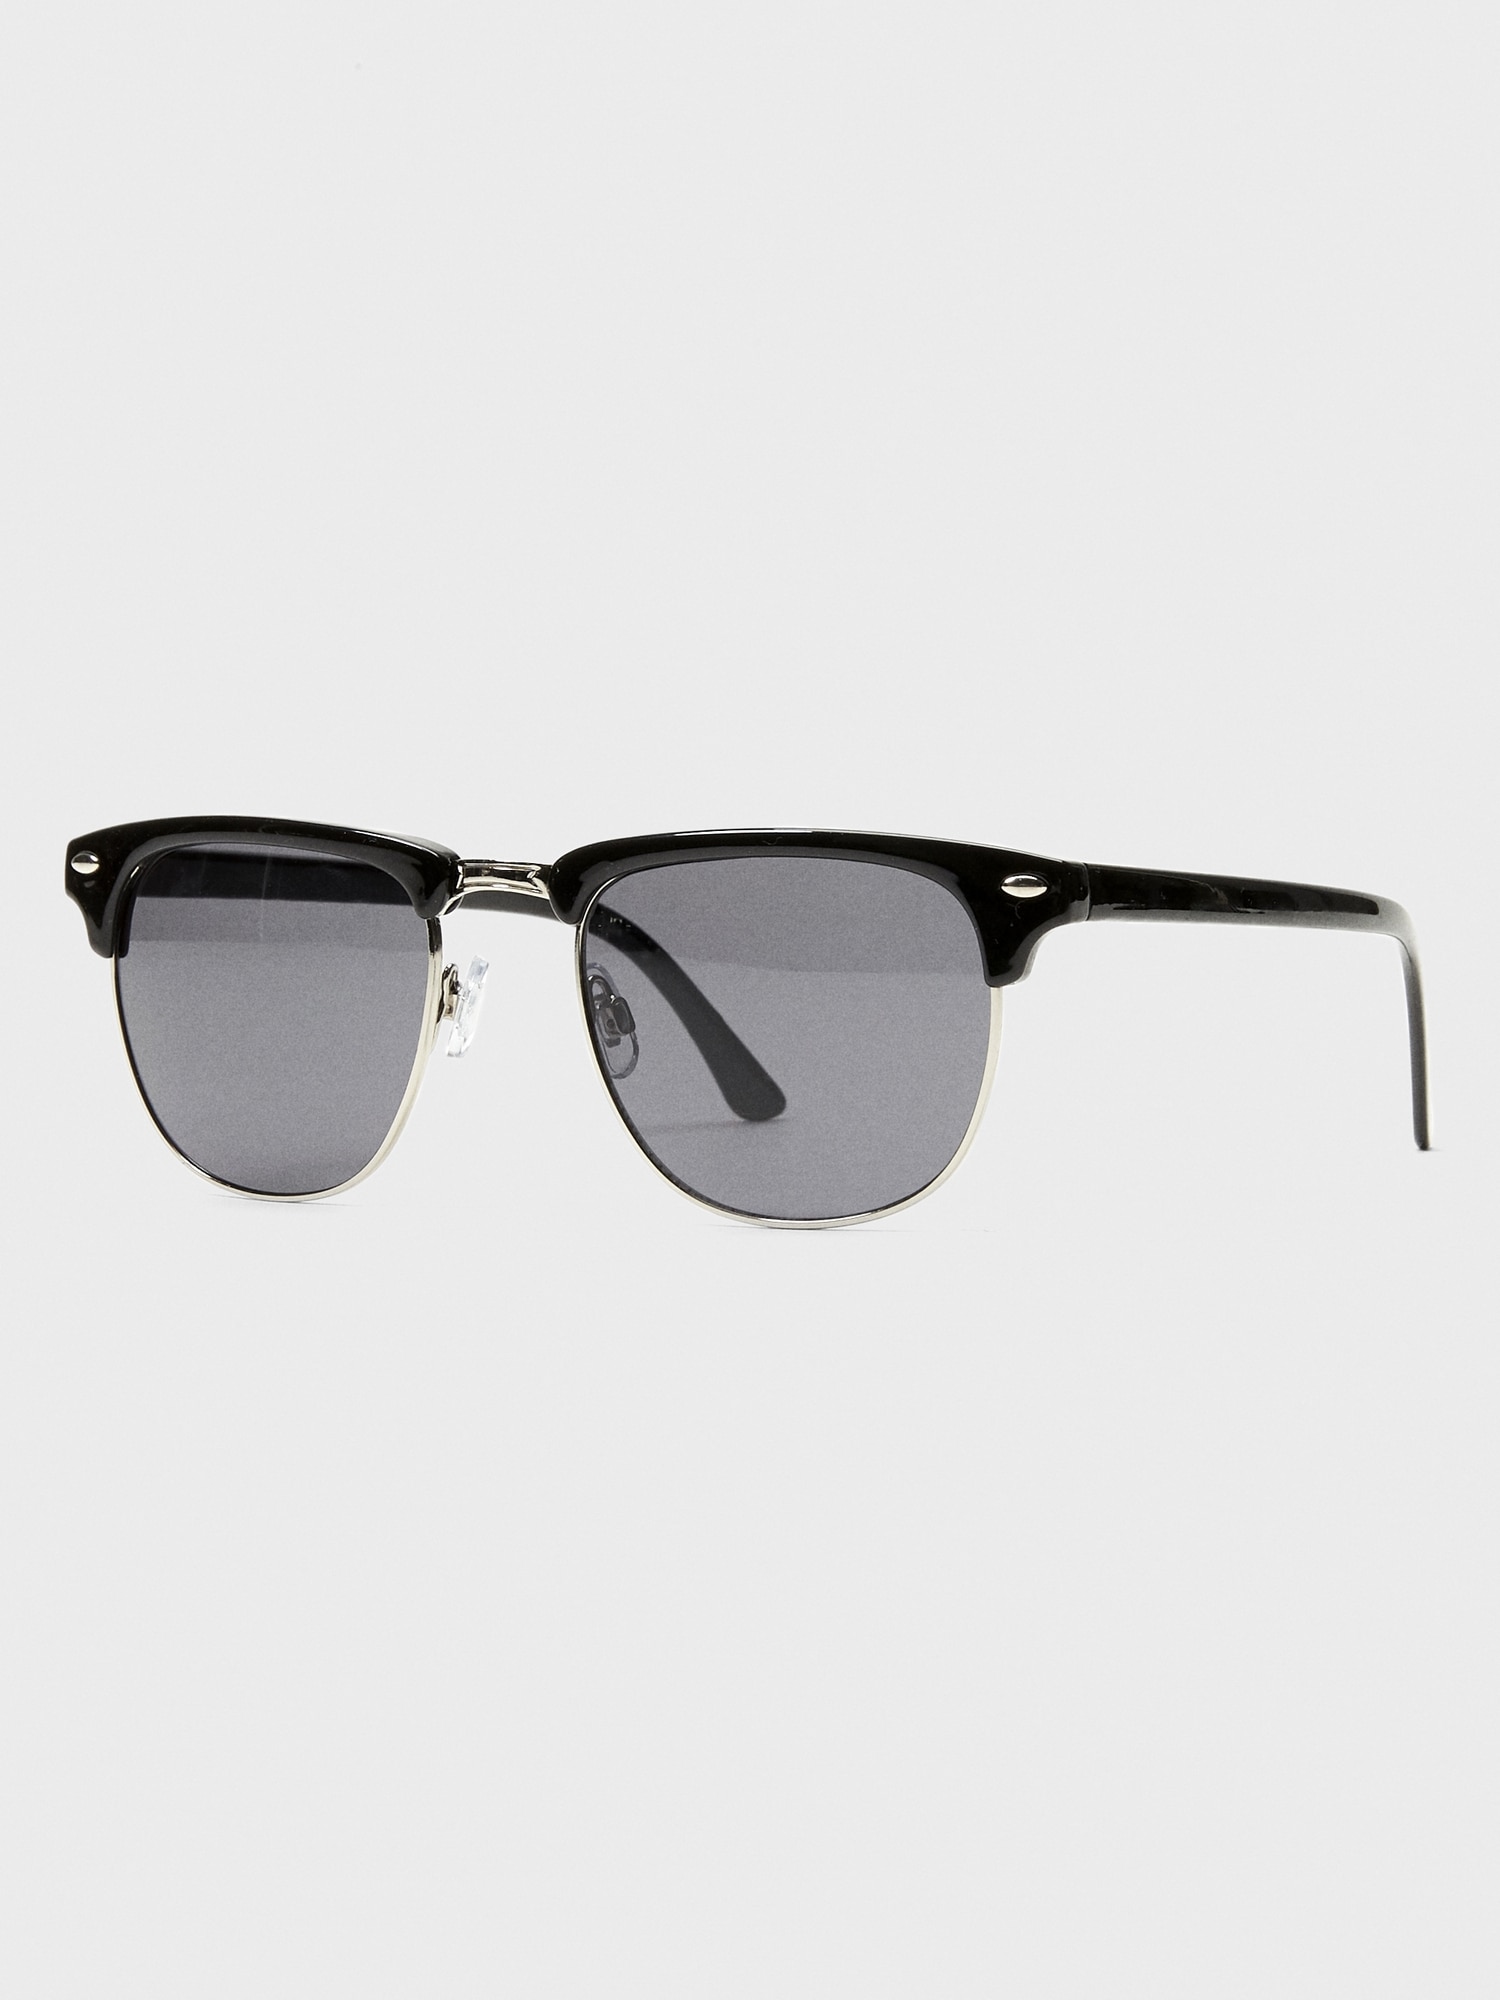 clubmaster shades